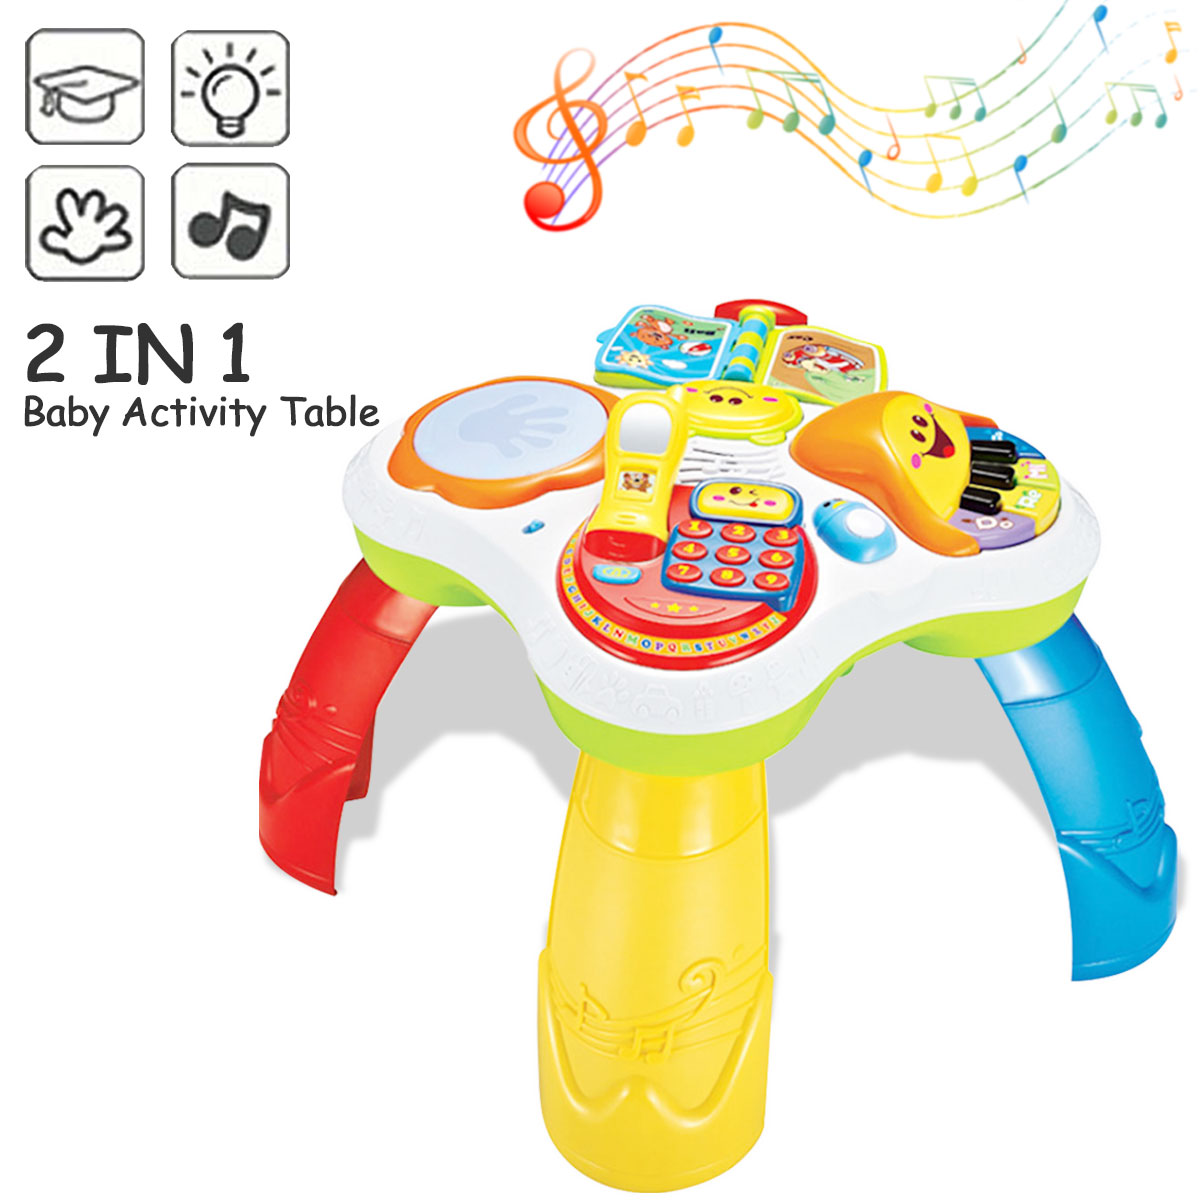 Activity-Table-For-1-Year-Old-And-Up--2-In-1-Baby-Standing-Activity-Center-Table-1697211-2